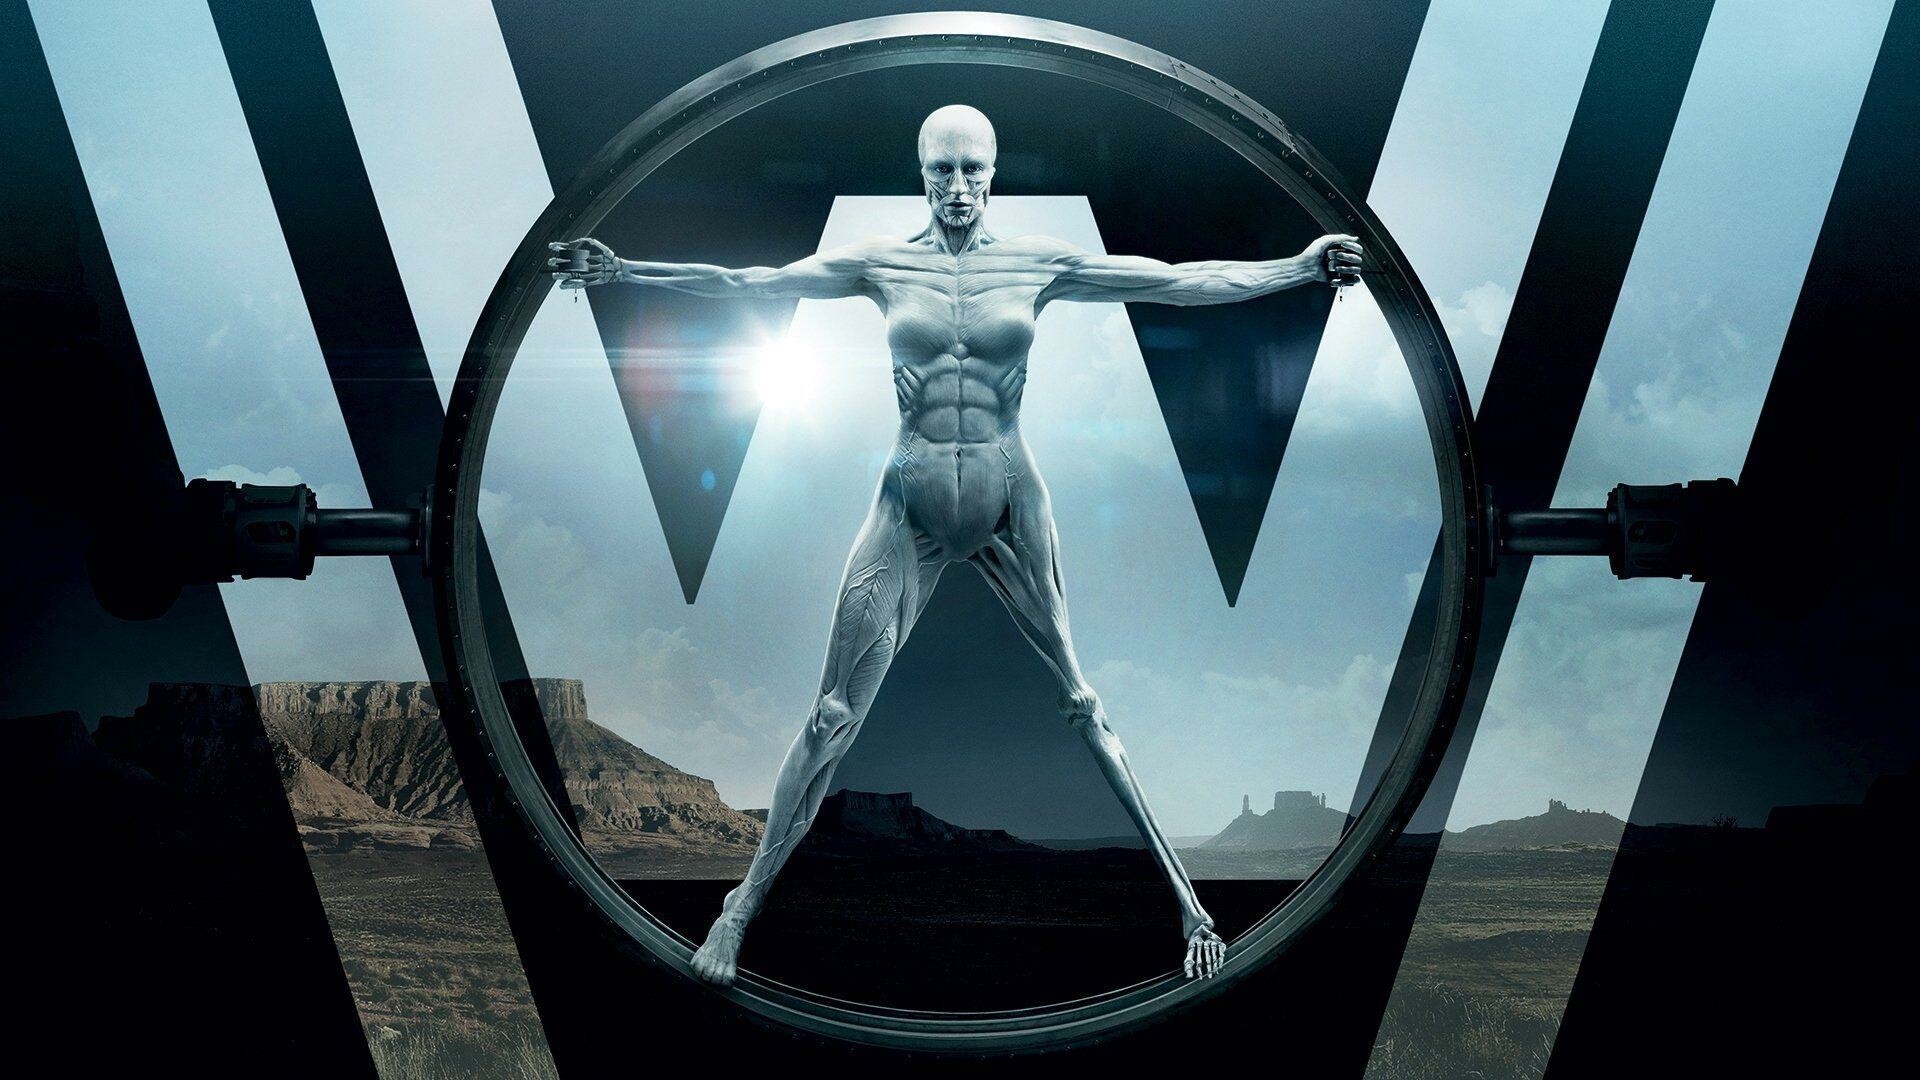 Westworld: The Emmy-winning drama series that follows the dawn of artificial consciousness and the evolution of sin. 1920x1080 Full HD Background.